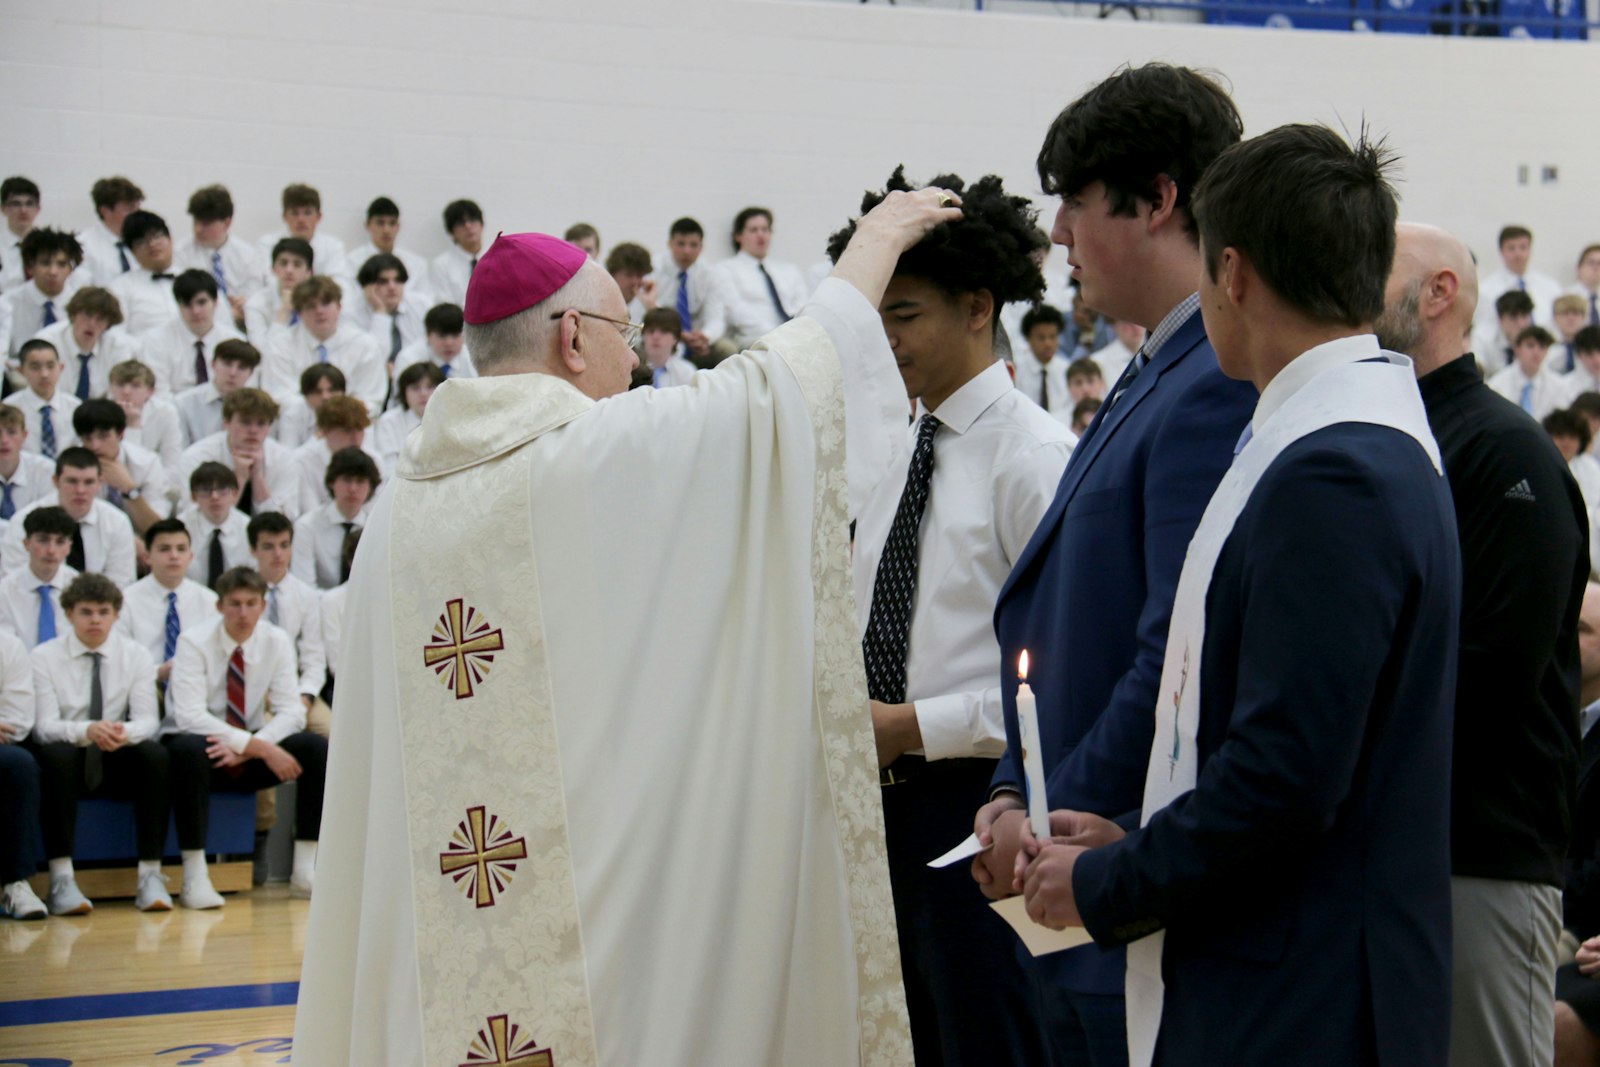 Bishop Hanchon consecrates the heads of the newly confirmed students with holy oil. Although the formation is led by theology teachers, Whitehead believes the young men were drawn to the faith because of the influence of their high school peers.